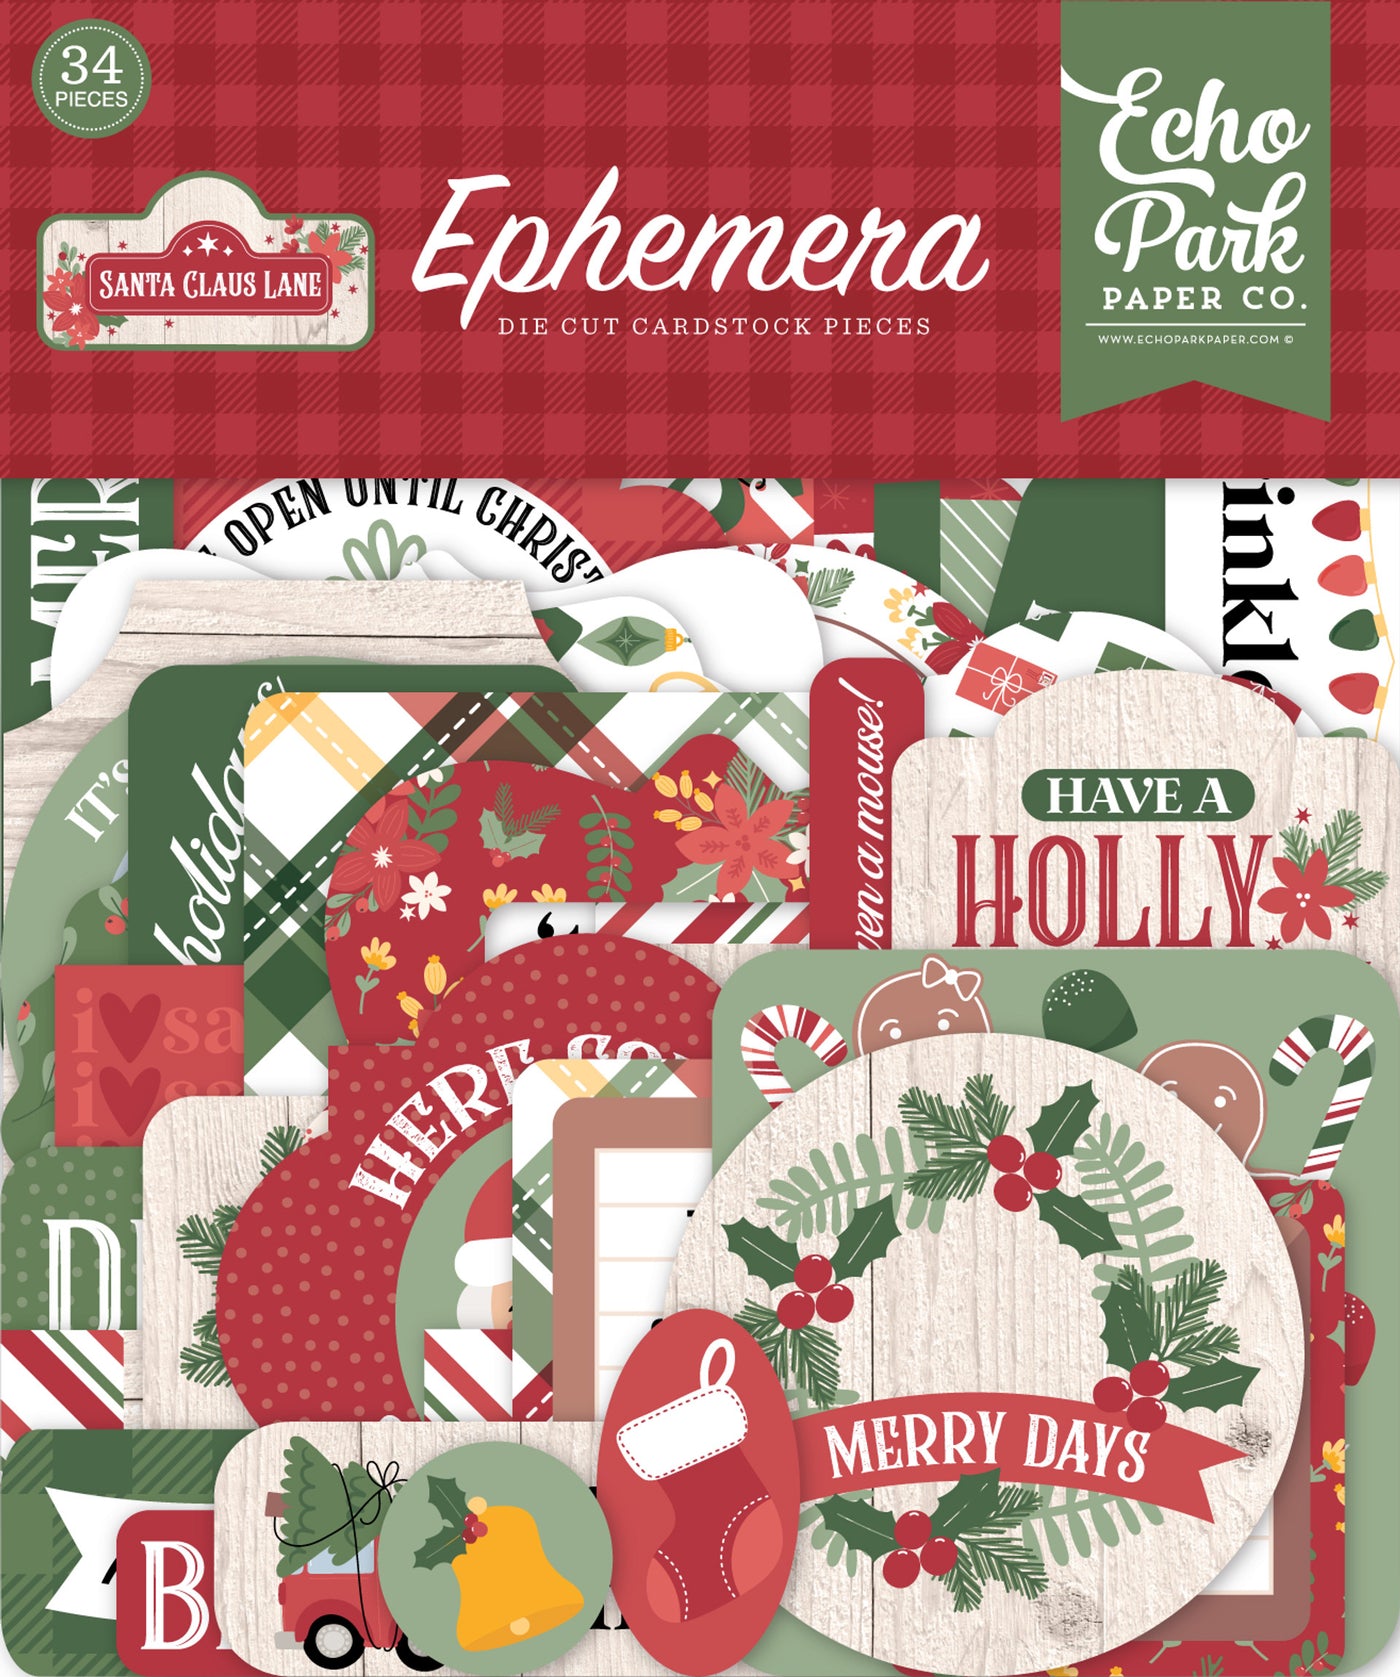 Santa Claus Lane Ephemera Die Cut Cardstock Pack.  Pack includes 34 different die-cut shapes ready to embellish any project.